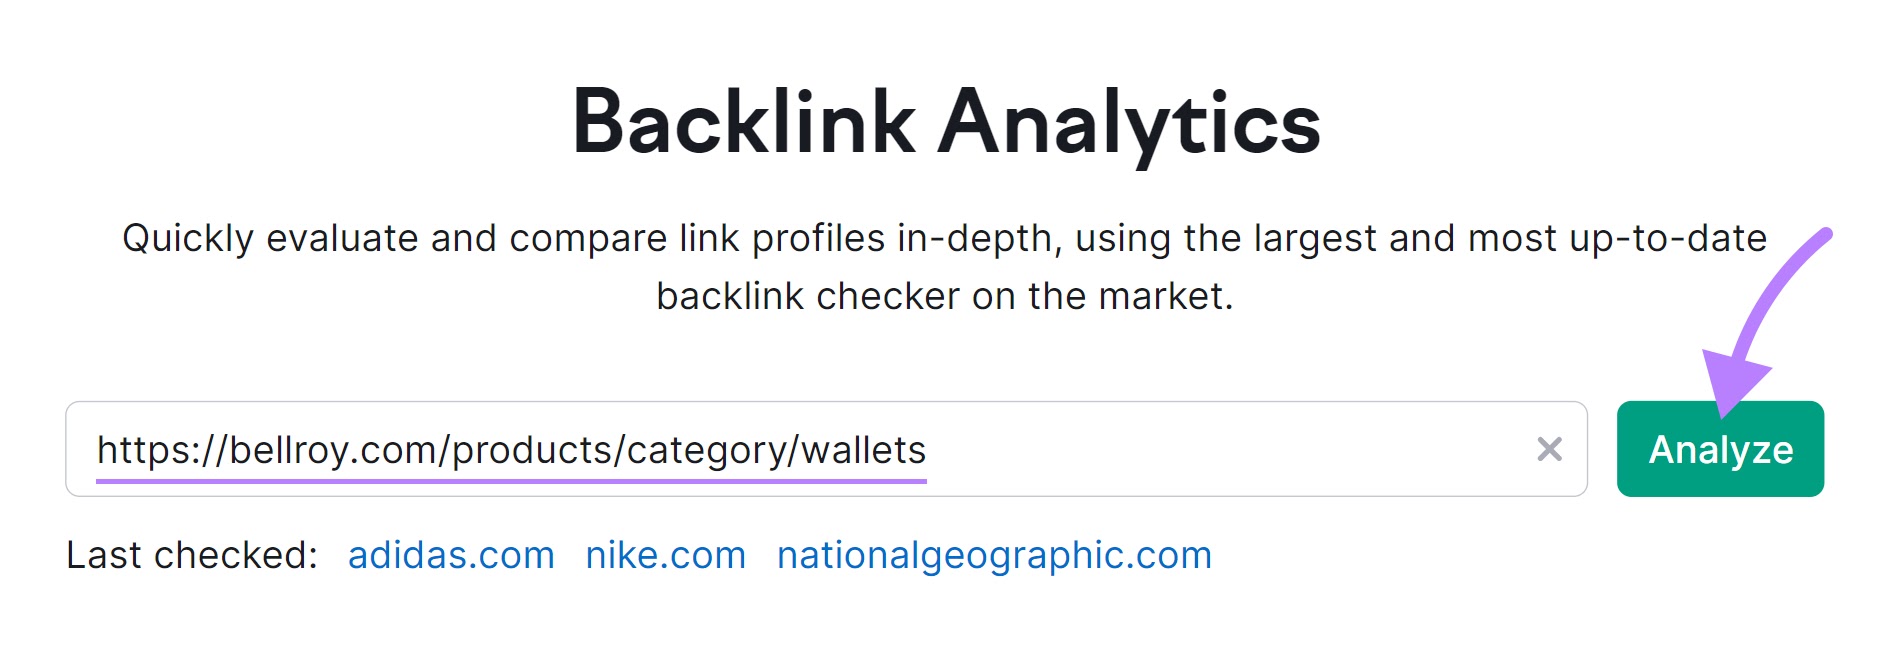 Backlink Analytics with a URL in the field provided